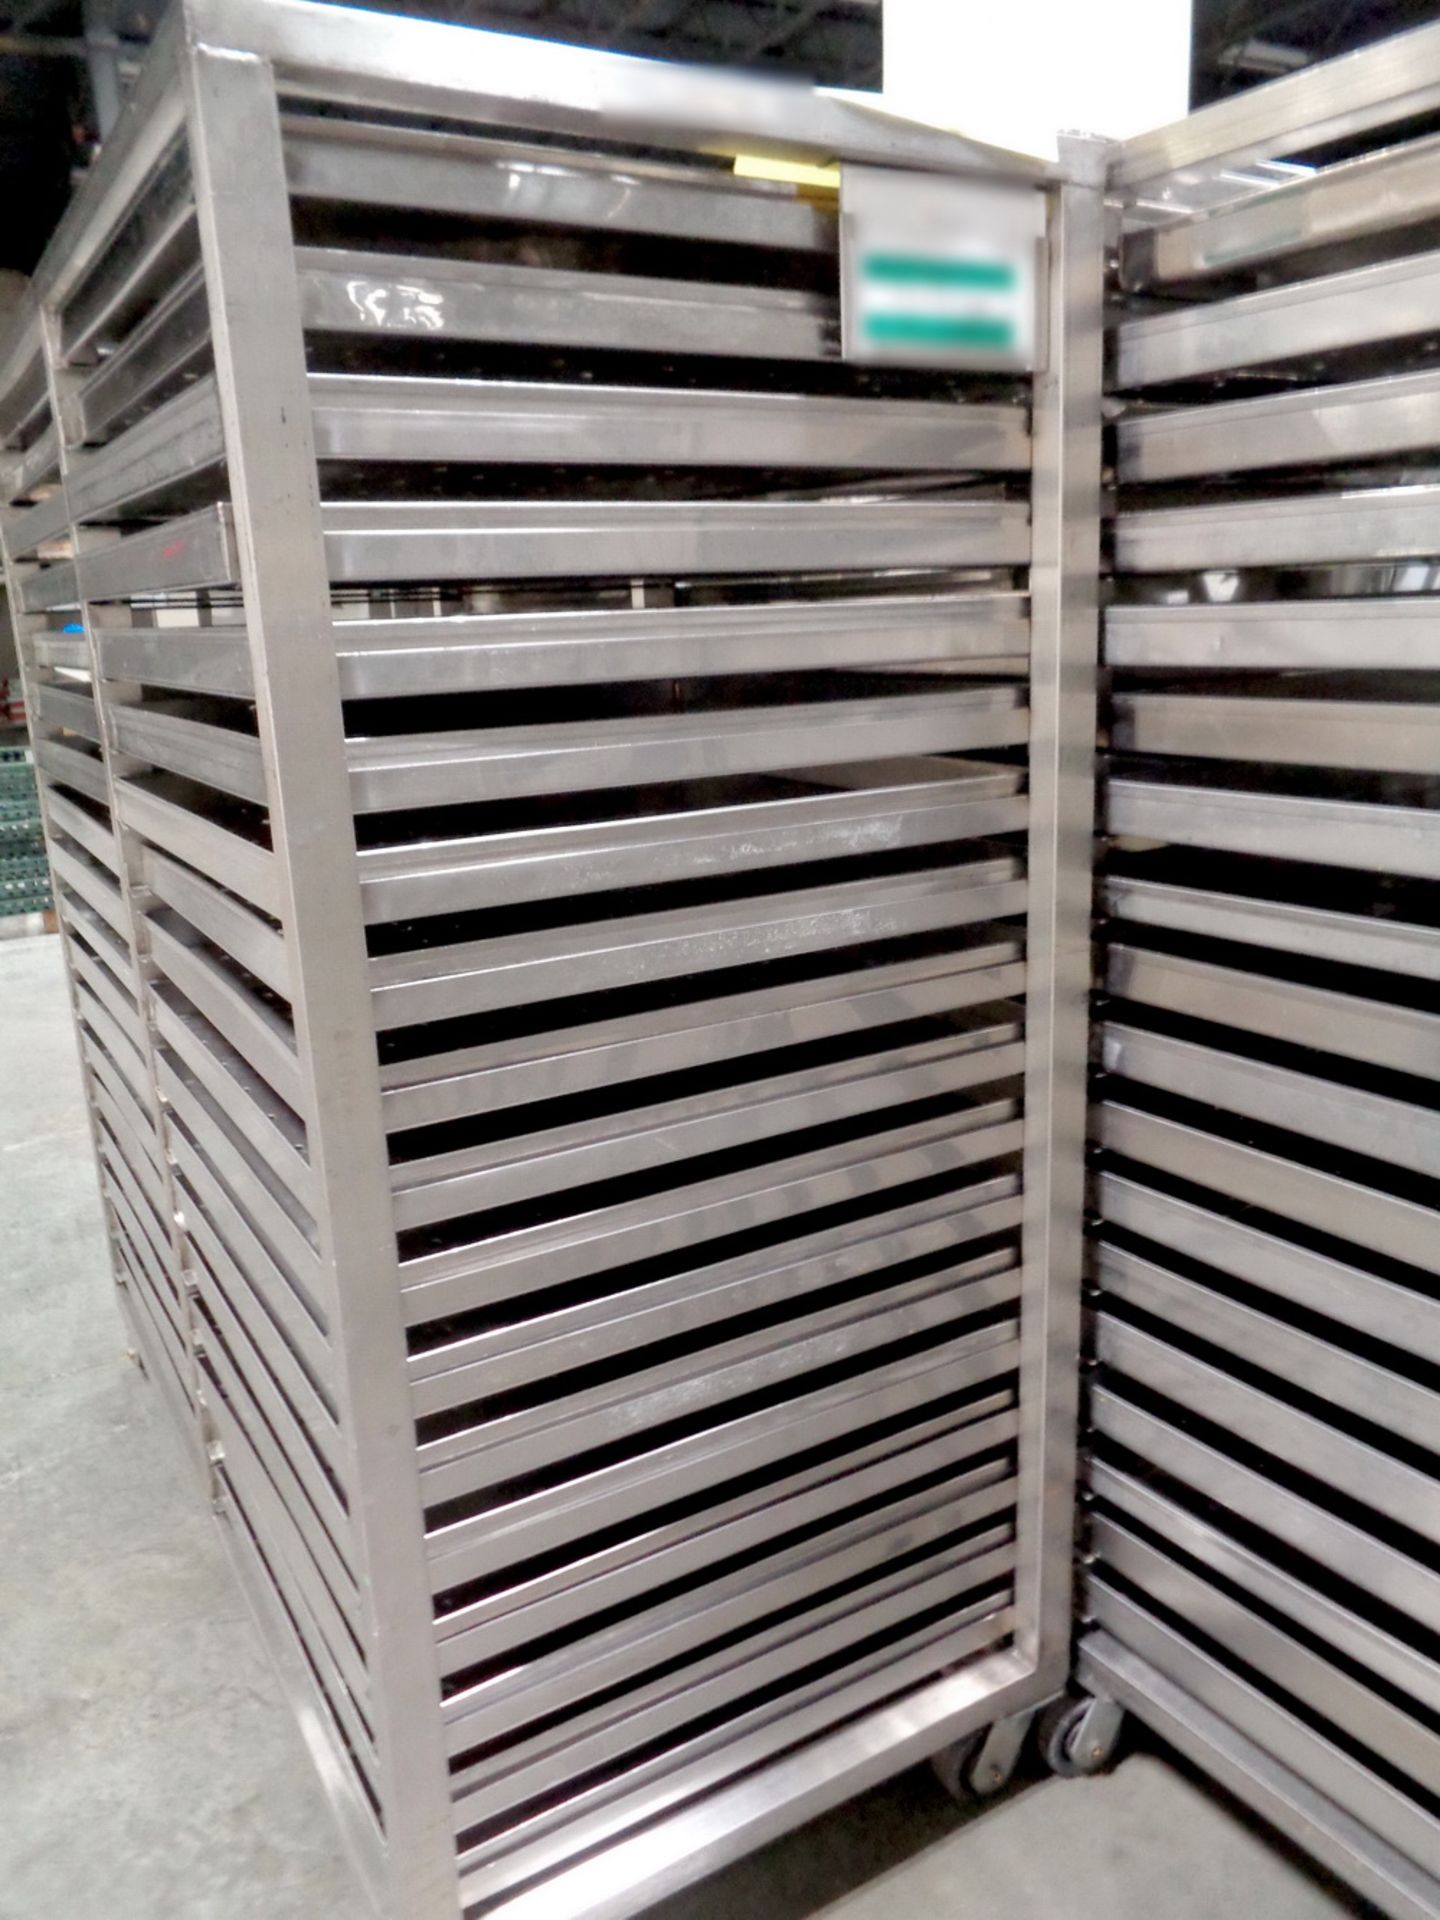 SS Oven Cart/Truck w/ 36 trays, each tray 30" x 30" x 2" - Image 3 of 3